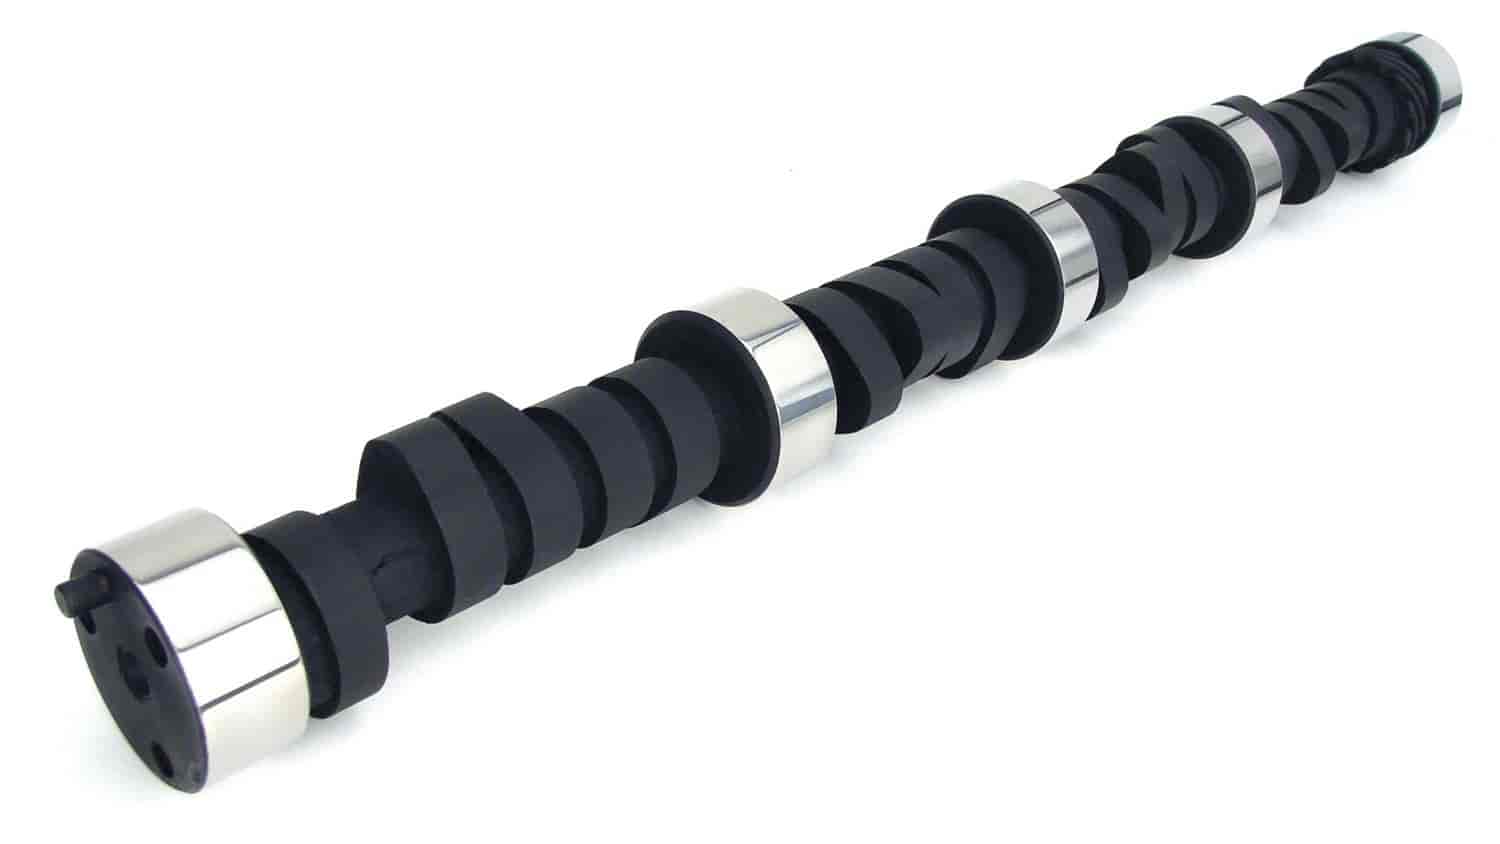 Xtreme Energy 284H Hydraulic Flat Tappet Camshaft Only Lift: .507" /.510" Duration: 284°/296° RPM Range: 2300-6500